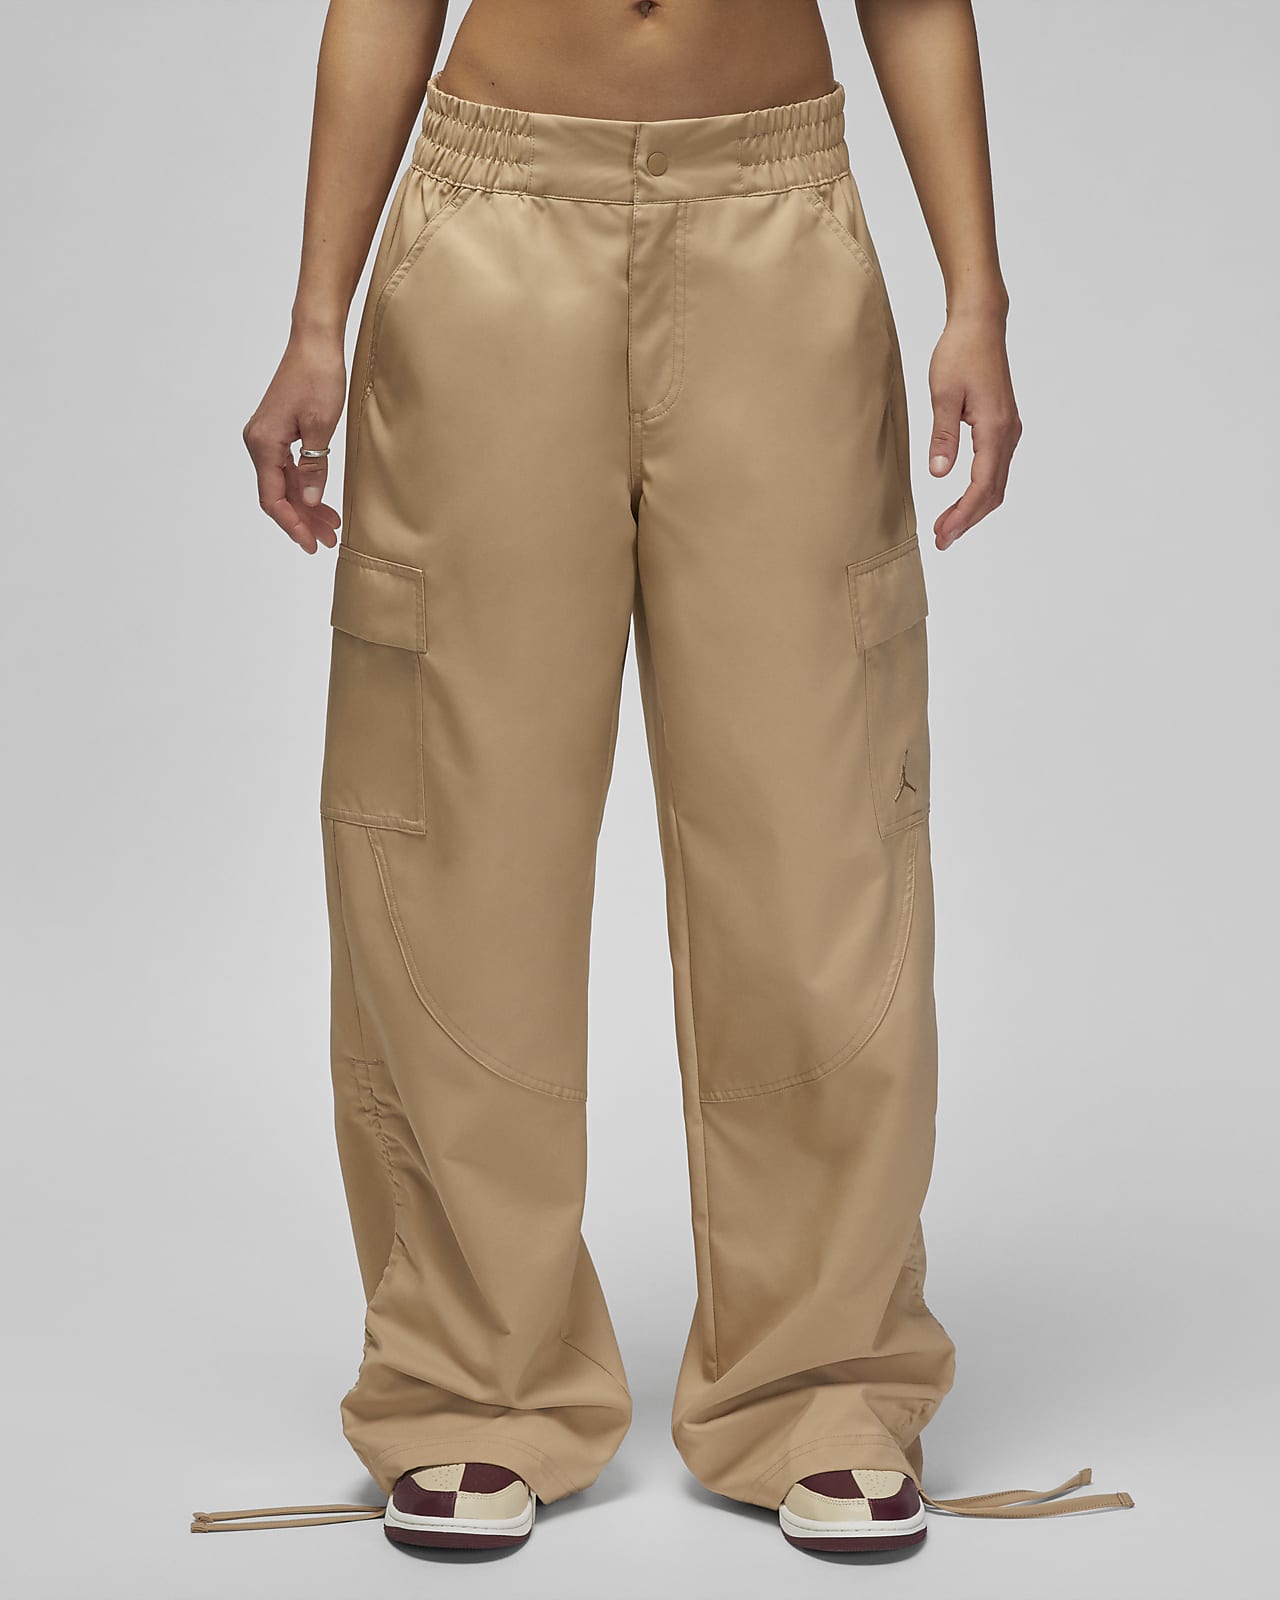 Low-waisted cargo trousers - Light beige - Ladies | H&M MY